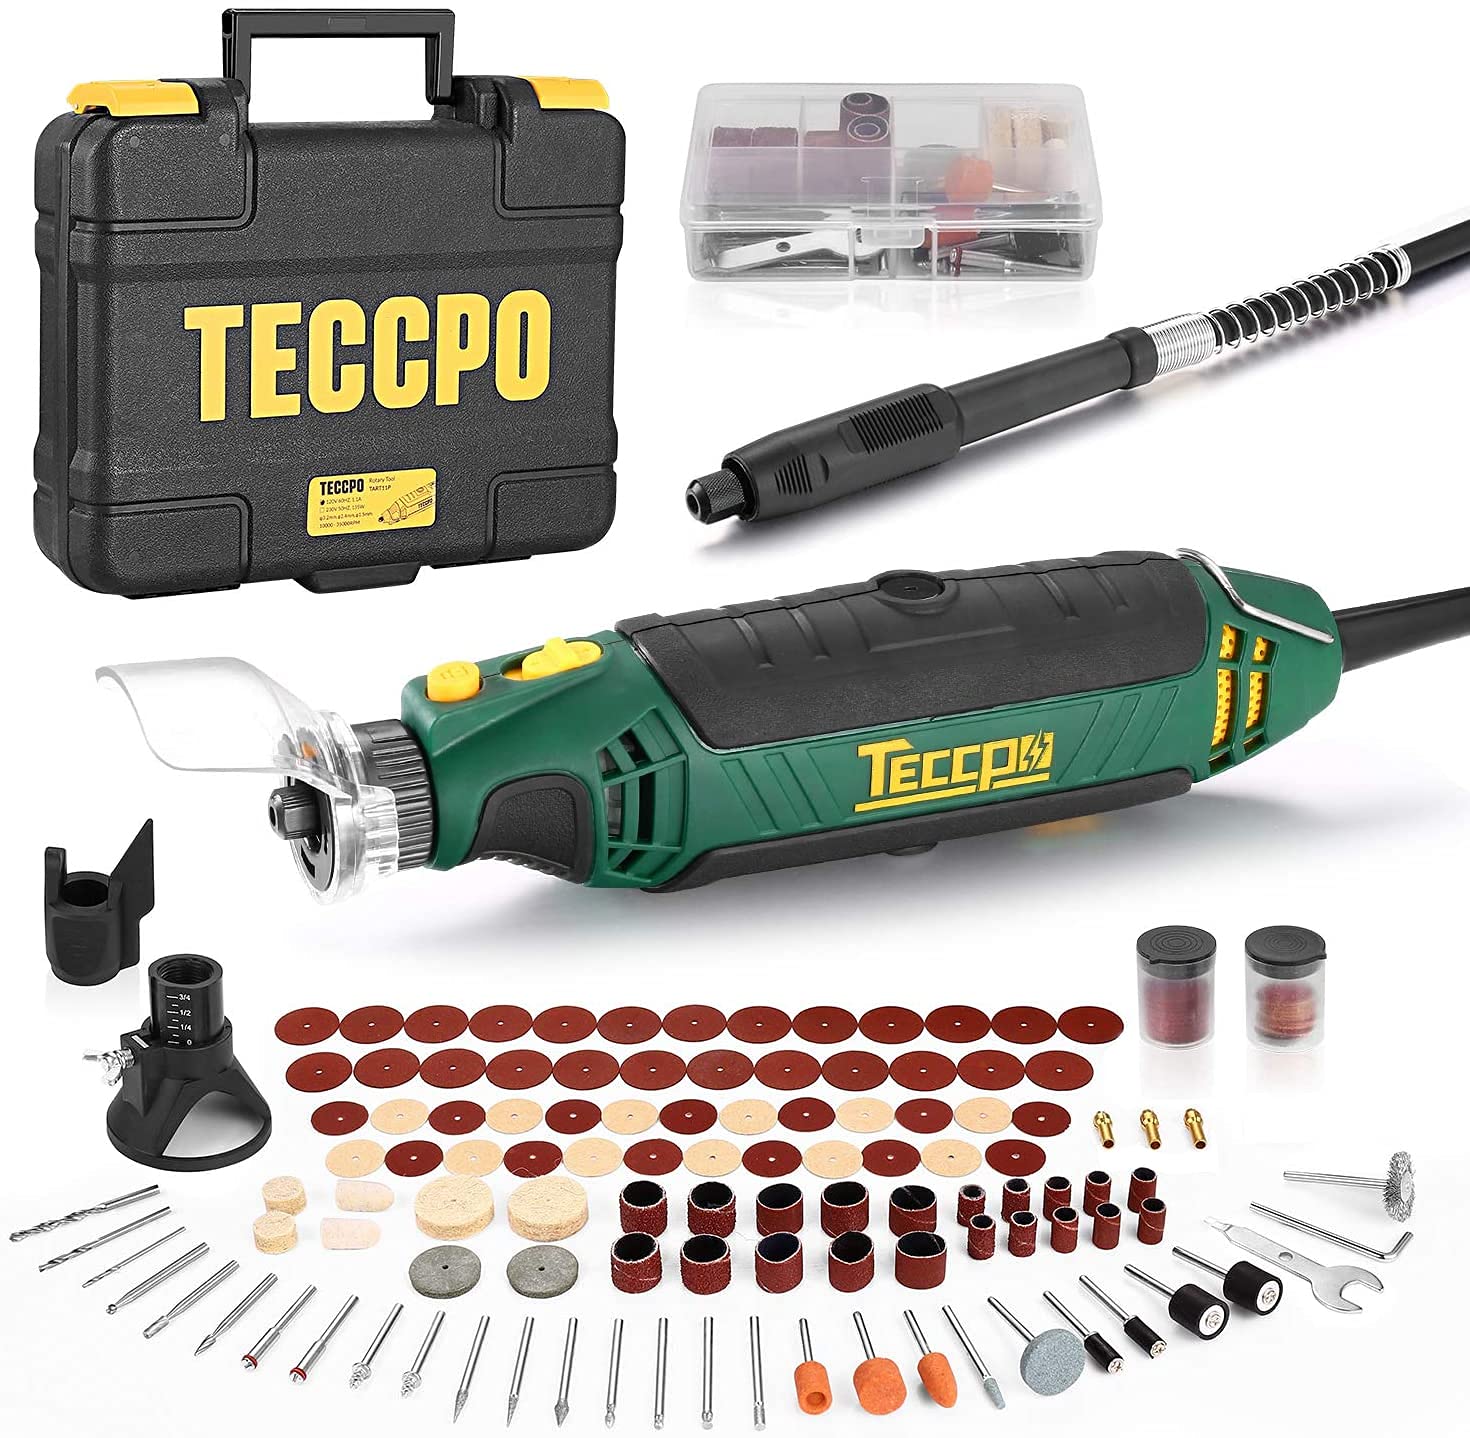 TECCPO Rotary Tool Kit, 110 Accessories, 4 Attachments, Carrying Case, 6 Variable Speed with Flex shaft, Protective Shield, Sharpening Guide, Cutting Guide, Ideal for Crafting Project and DIY